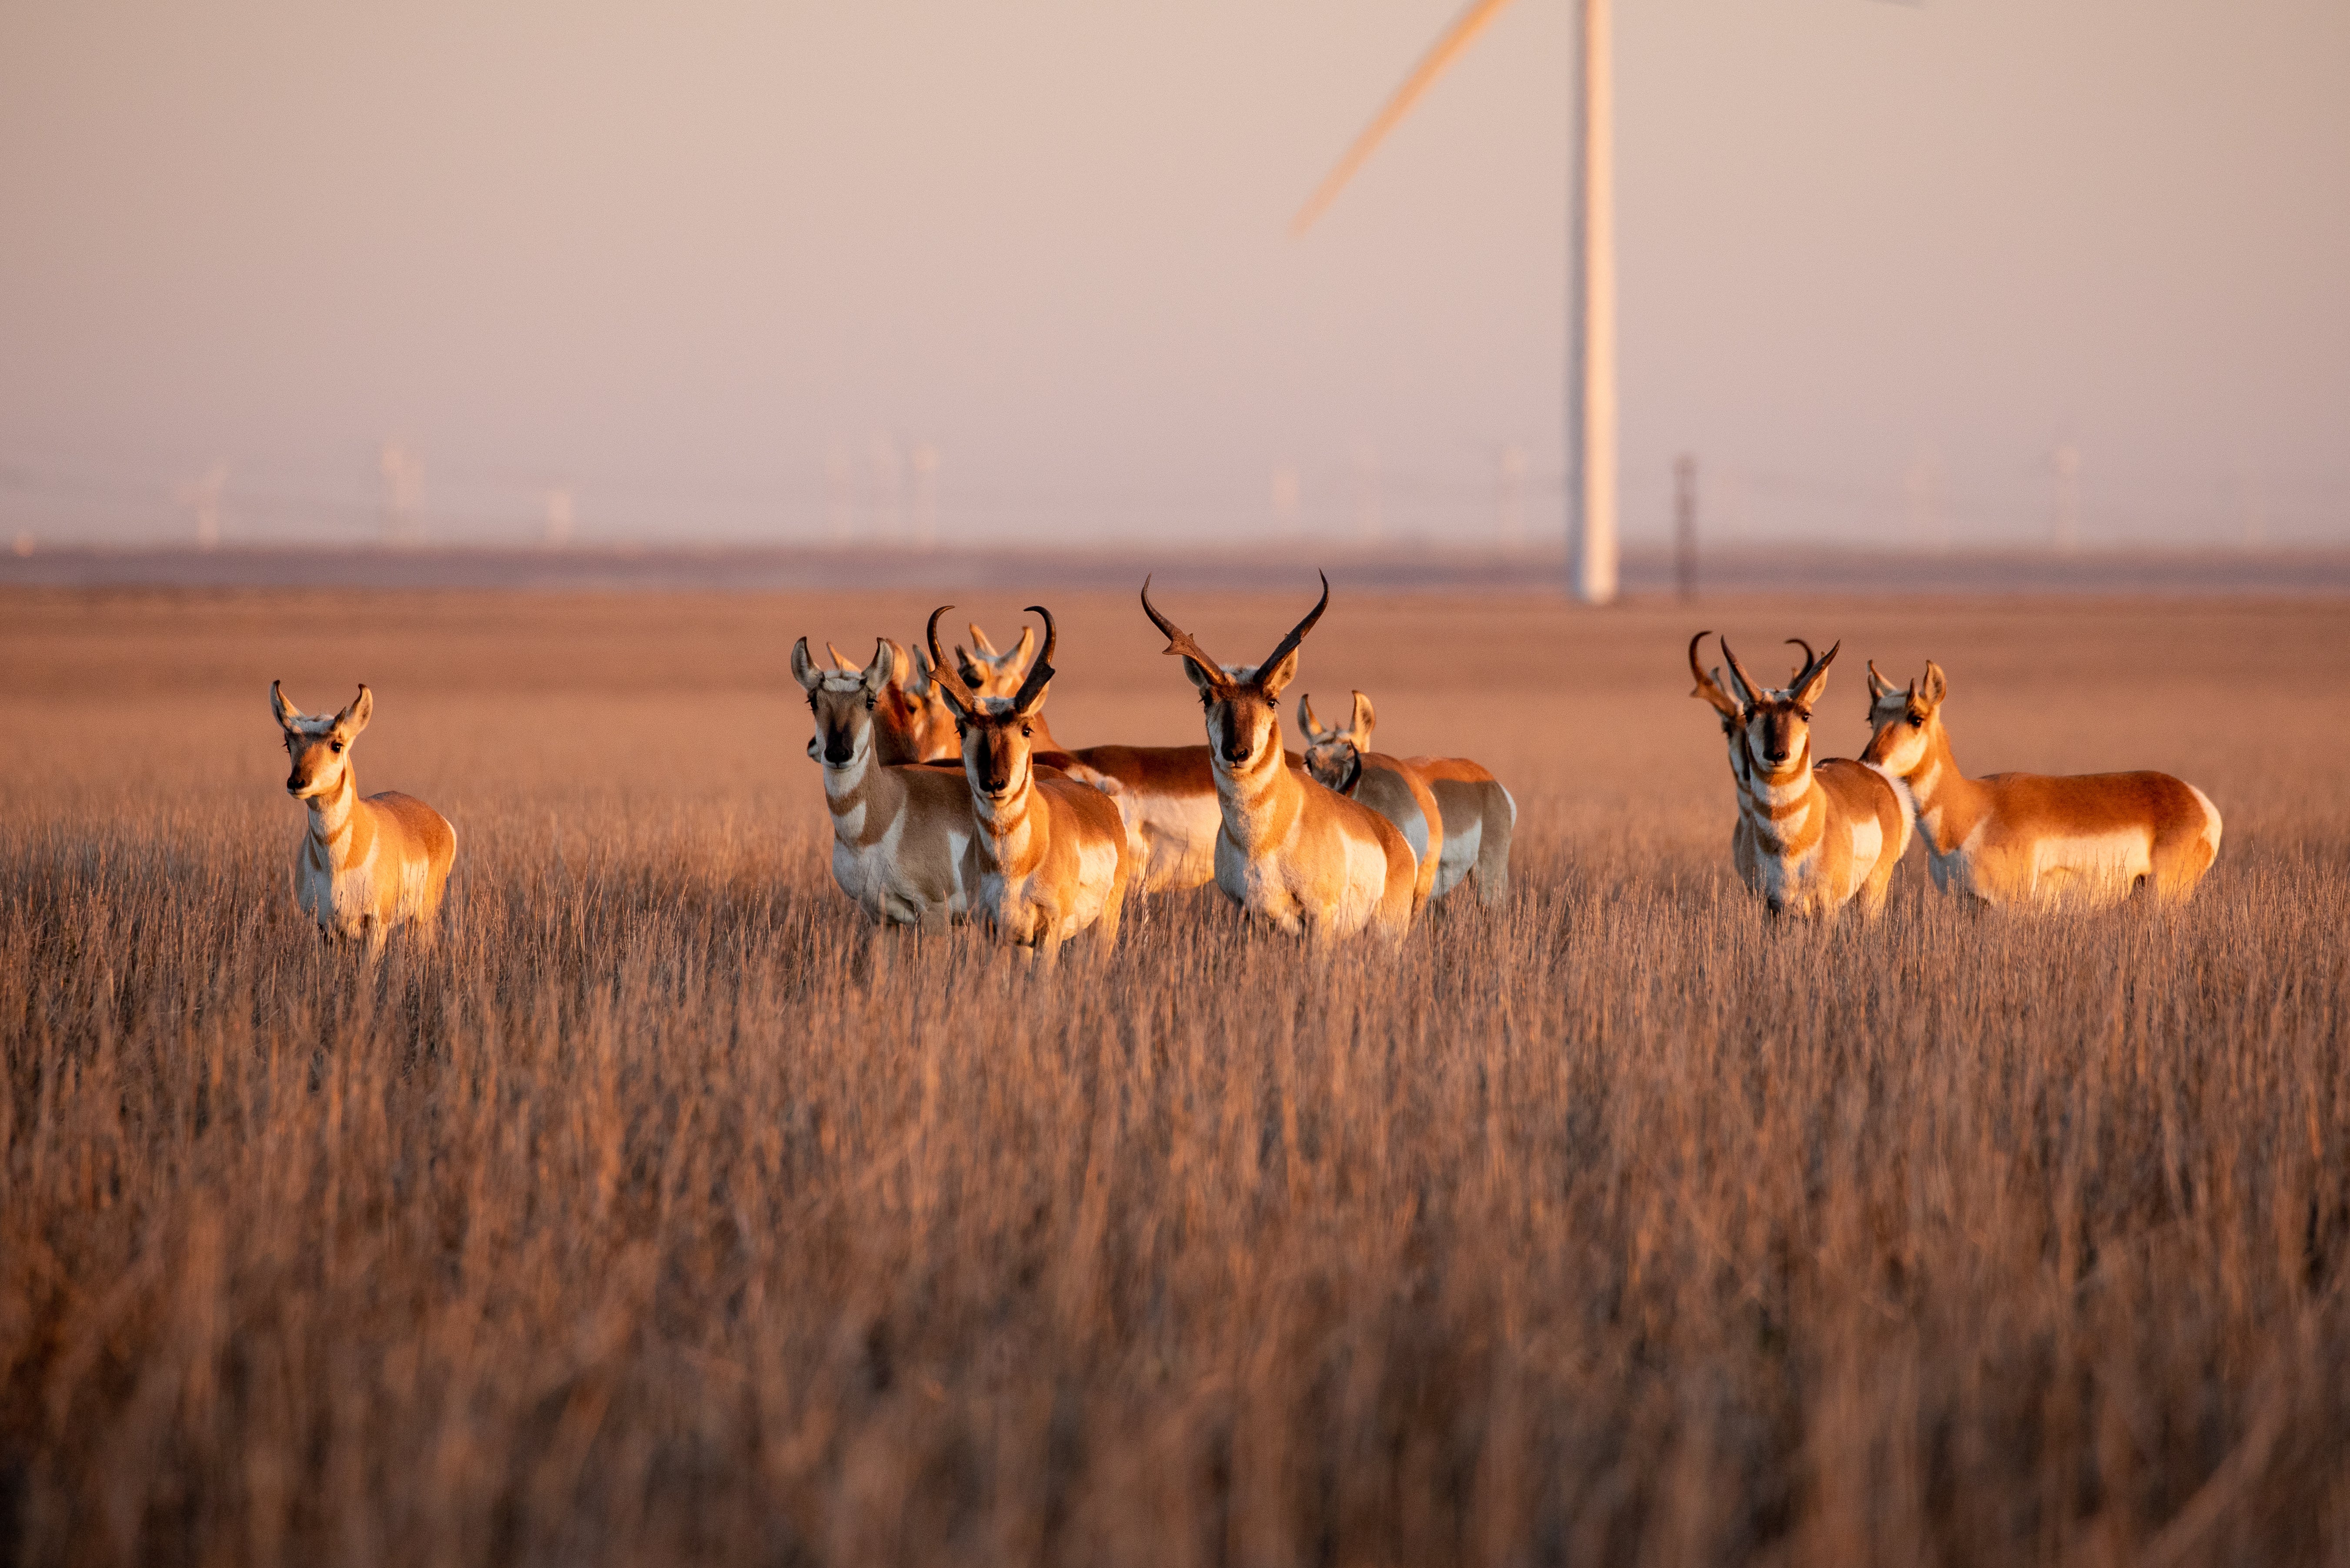 Antelope in front of wind turbines